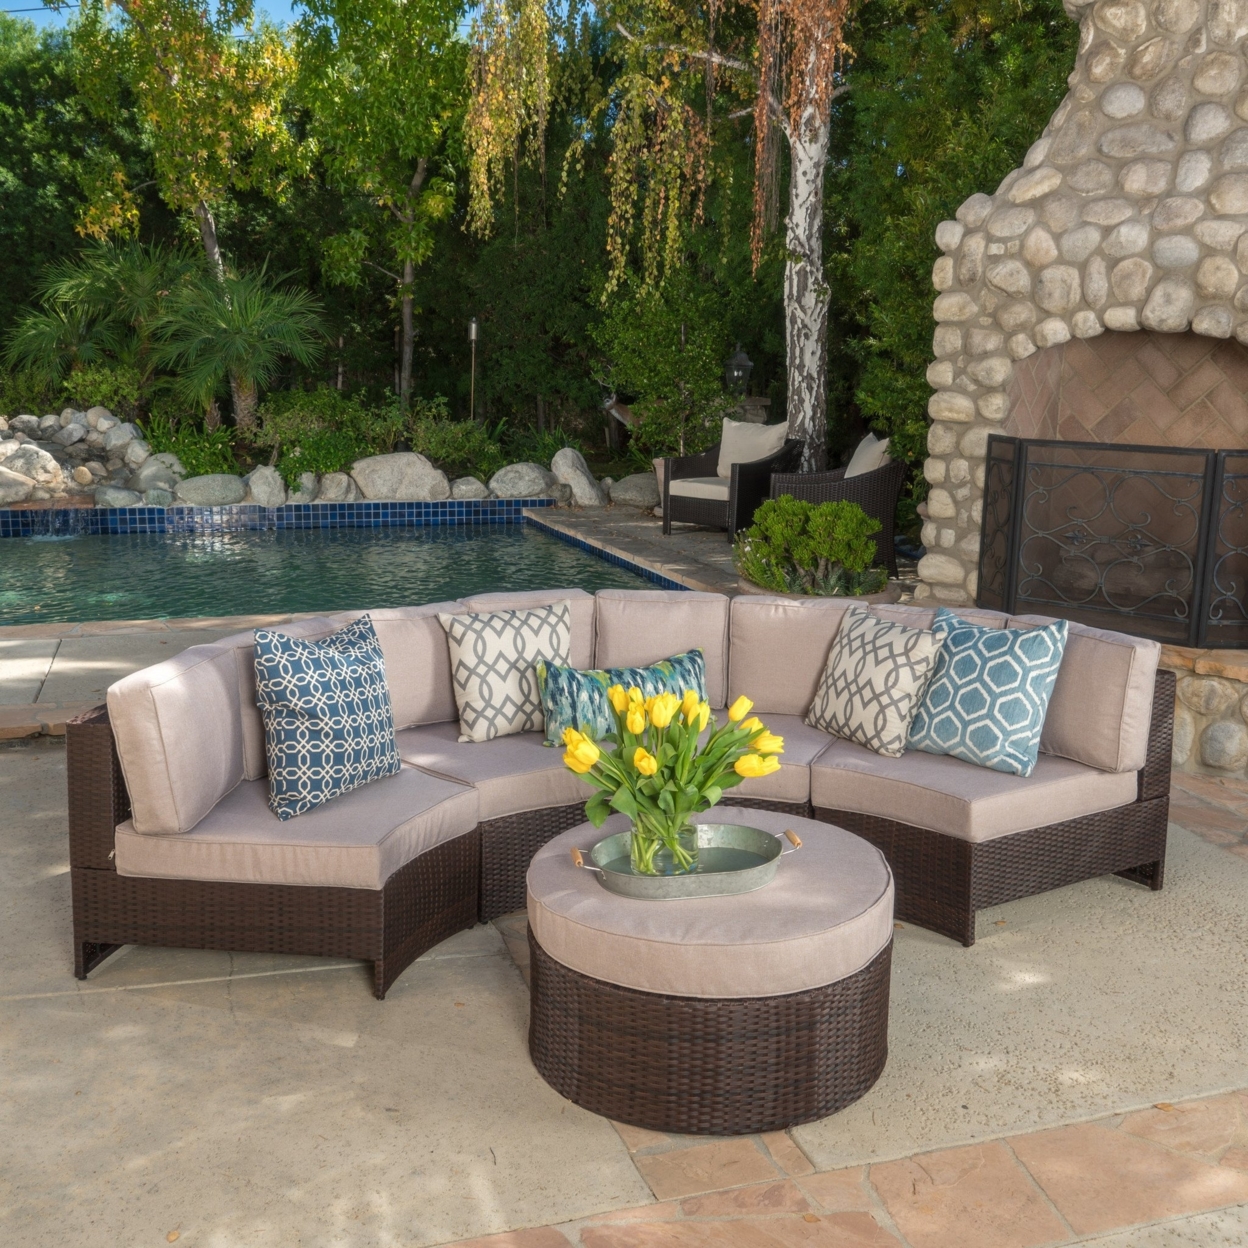 Riviera 5pc Outdoor Sectional Sofa Set - Beige